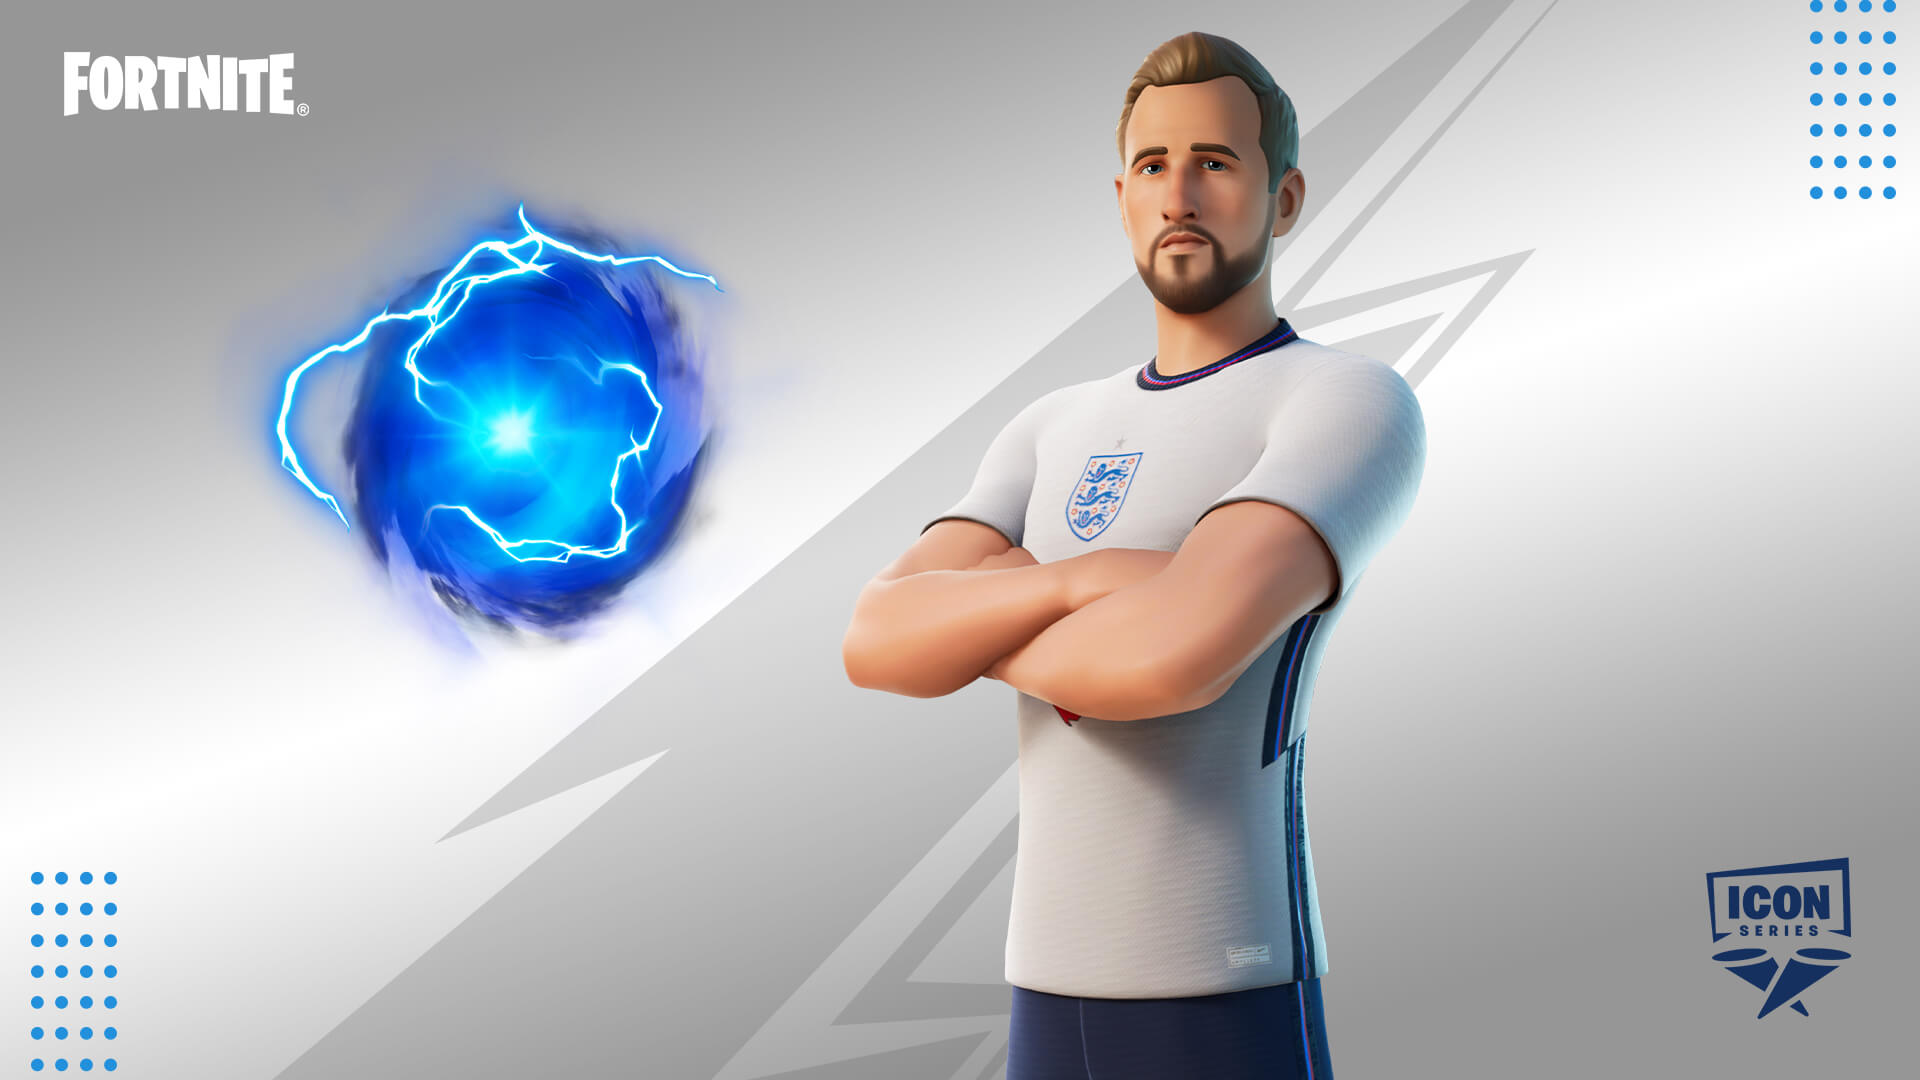 Harry Kane and Marco Reus join the Fortnite Icon Series